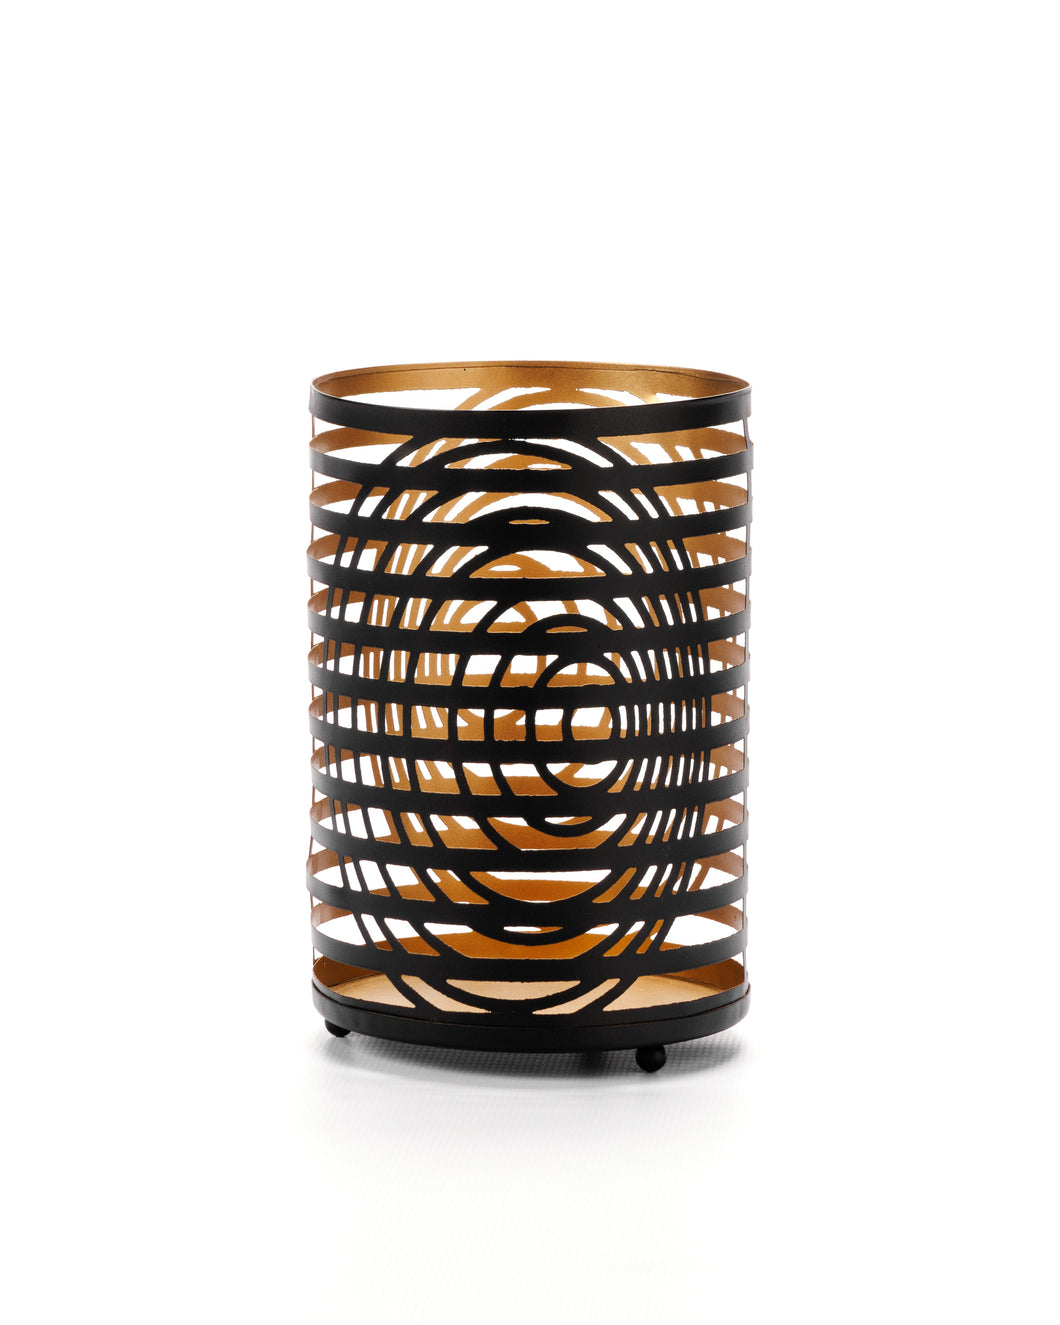 A black and gold Spiral Votive Candle Holder made of metal